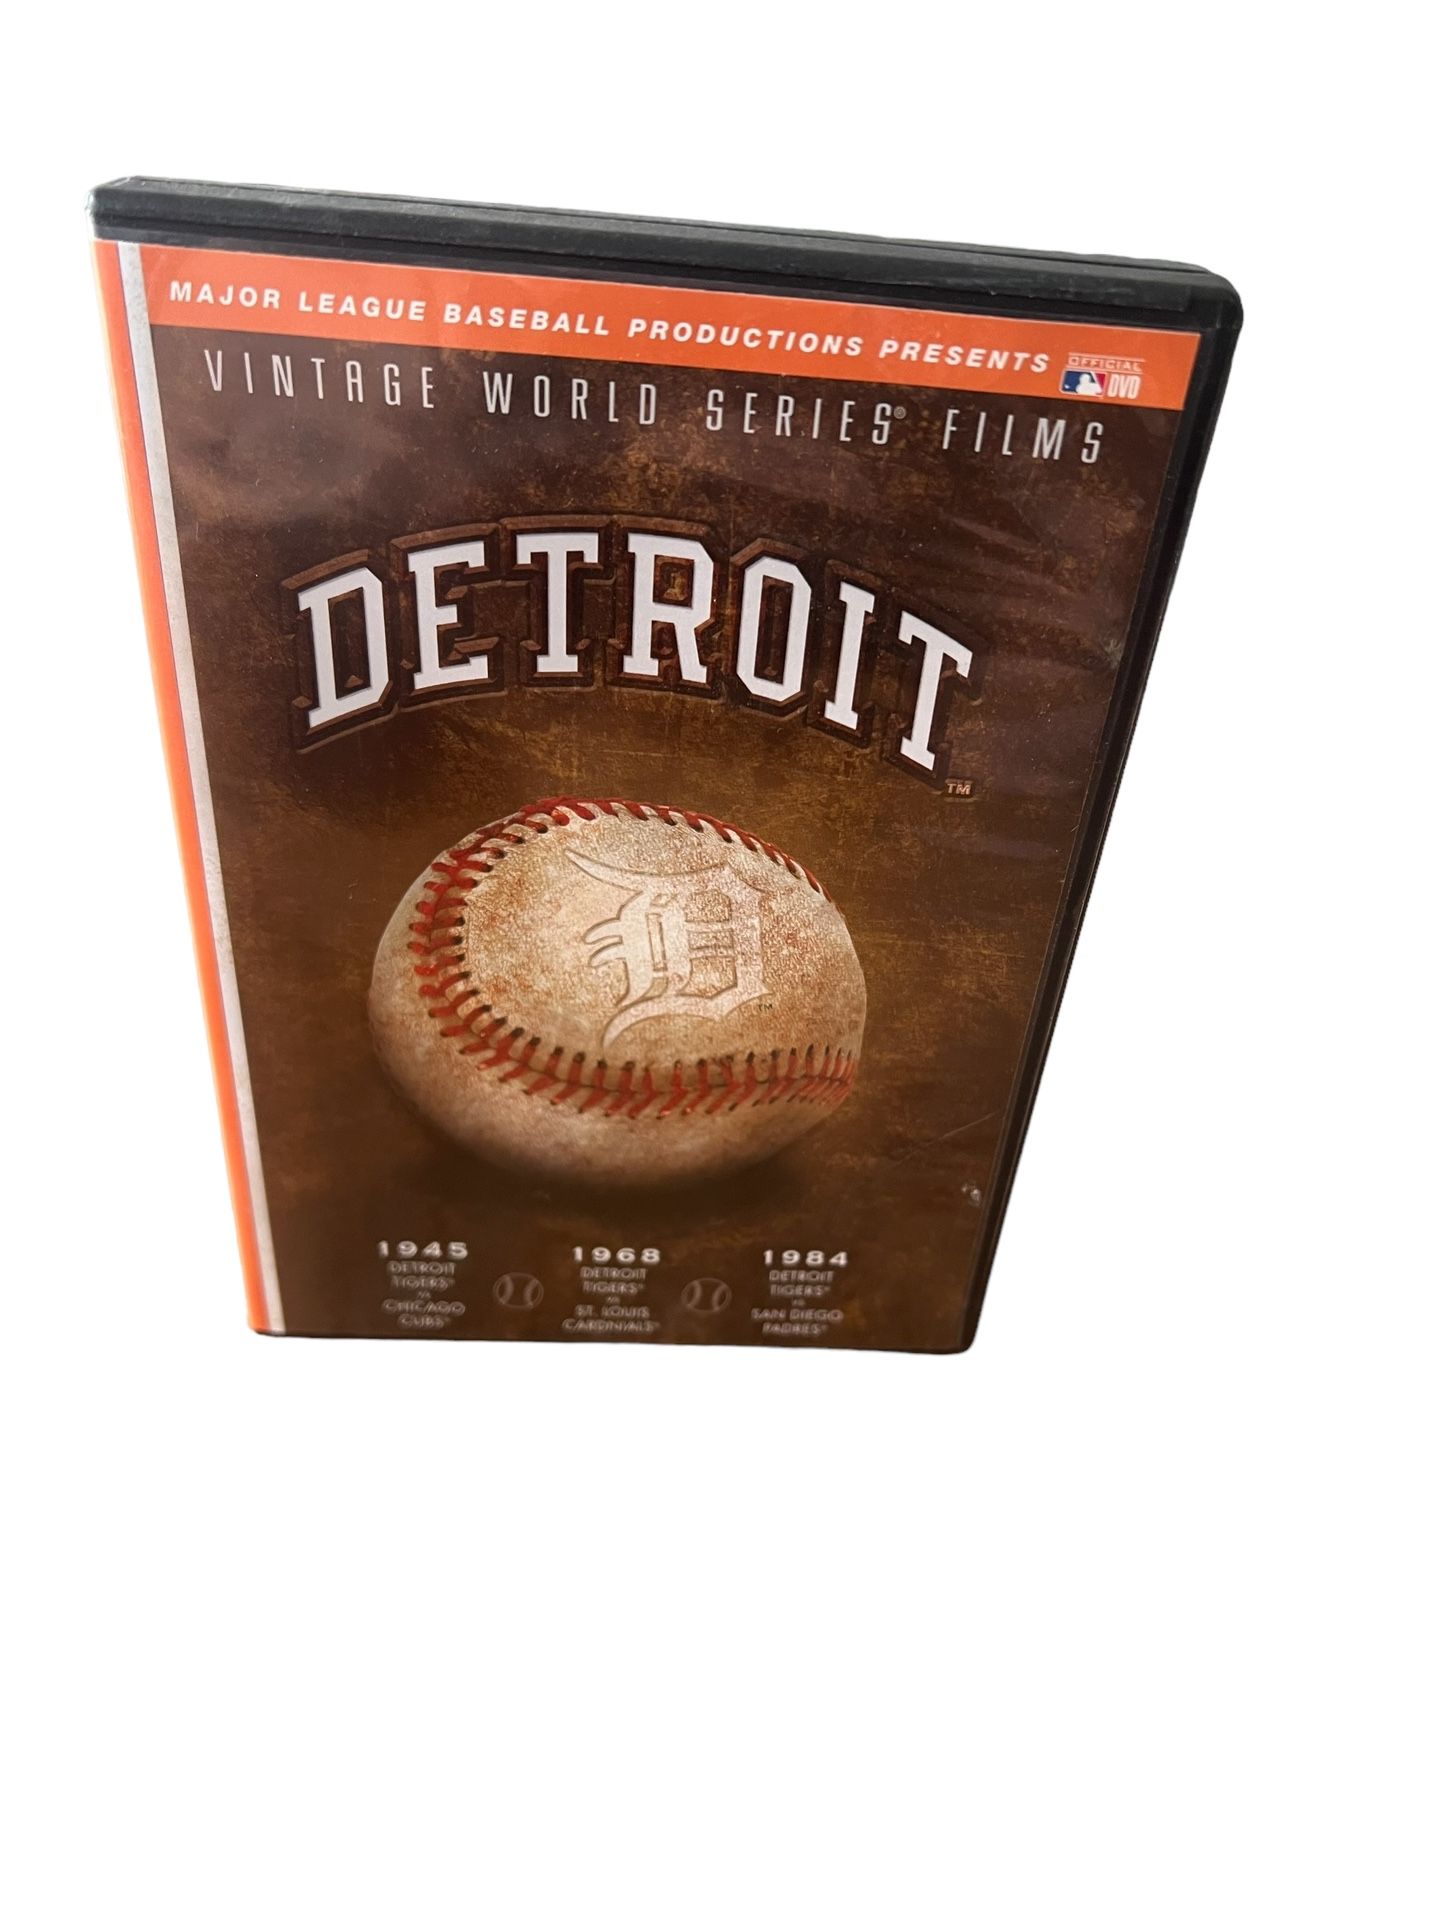 Detroit As Vintage World Series Film (DVD, 2006)  This vintage DVD features the historic Detroit A's World Series baseball games. Take a step back in 